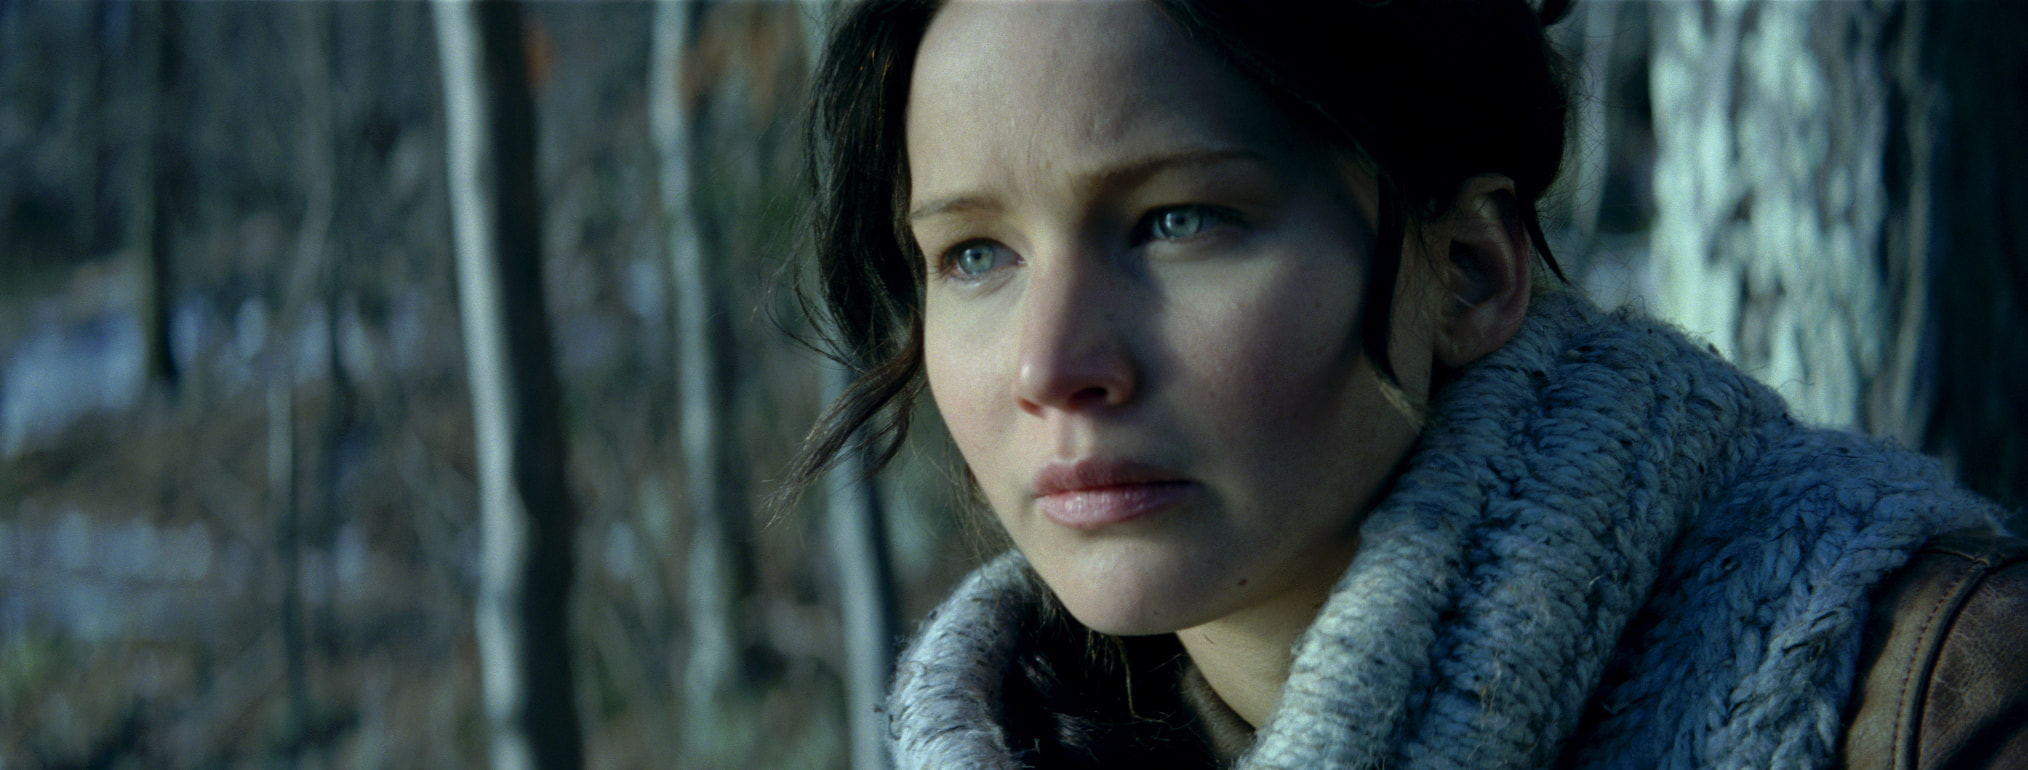 The Hunger Games,Catching Fire,Jennifer Lawrence